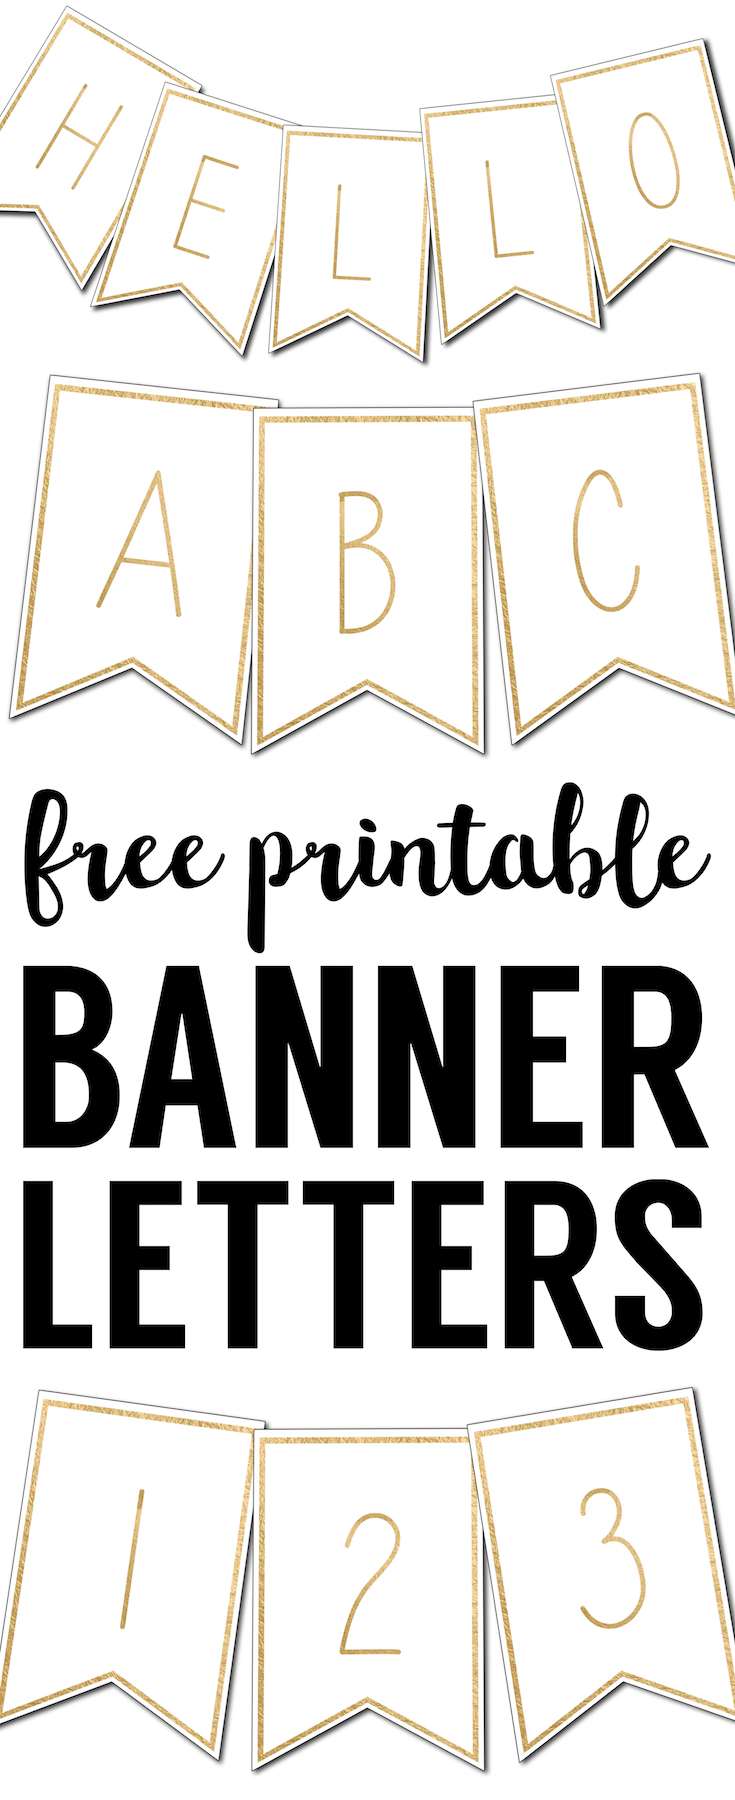 free-printable-banners-letters